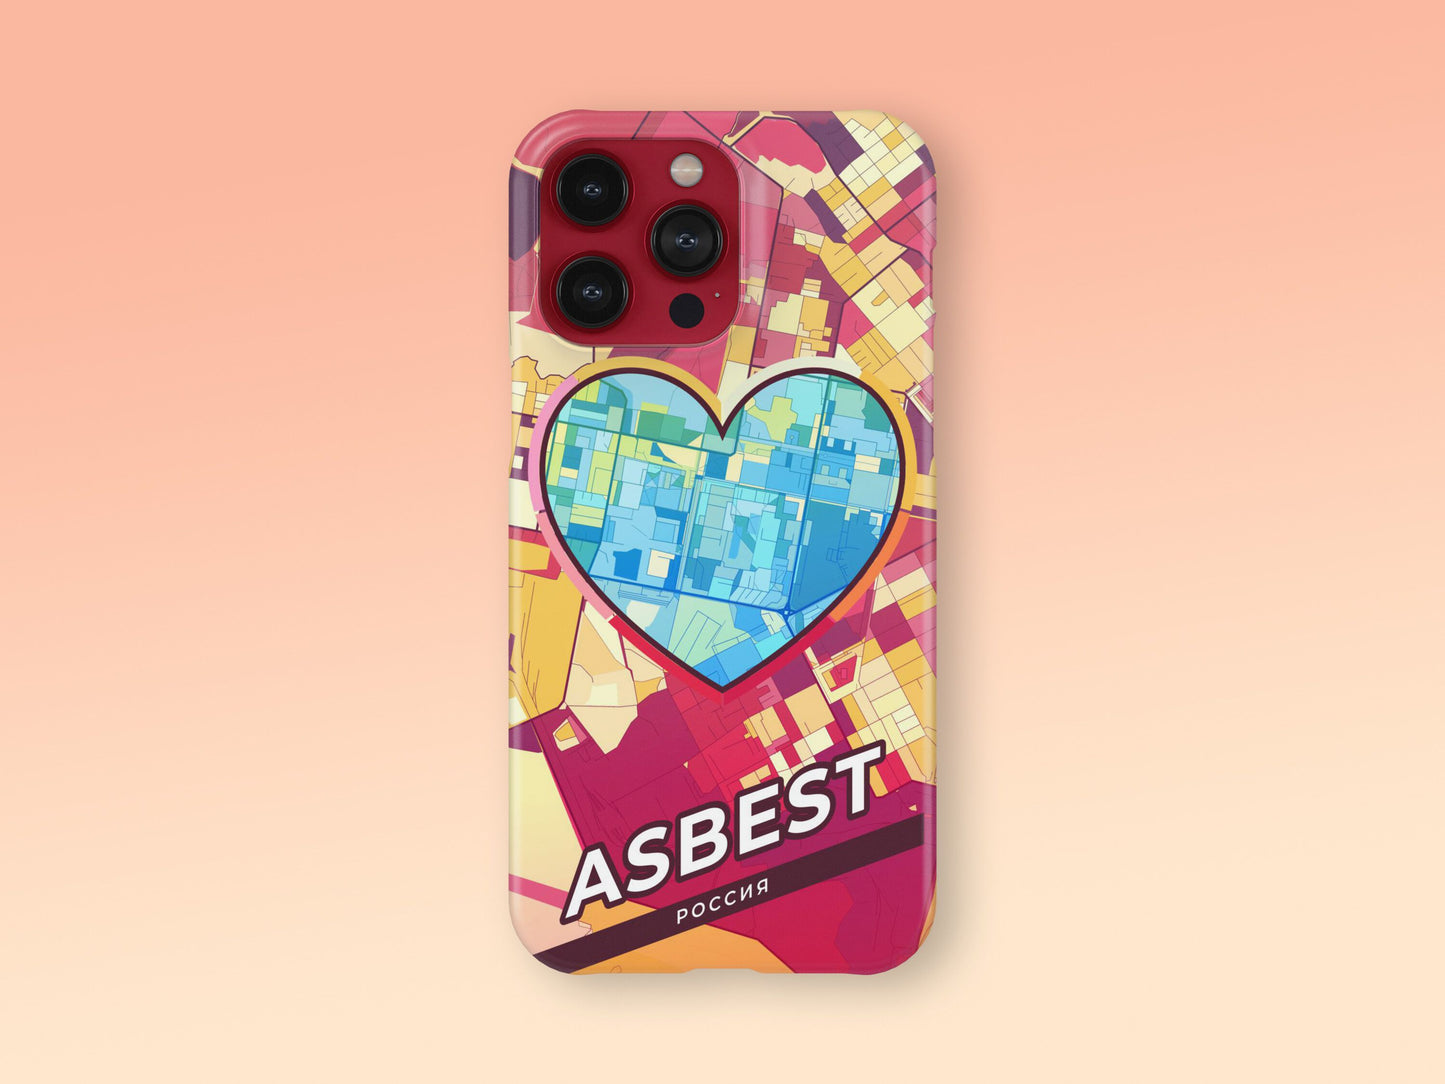 Asbest Russia slim phone case with colorful icon. Birthday, wedding or housewarming gift. Couple match cases. 2